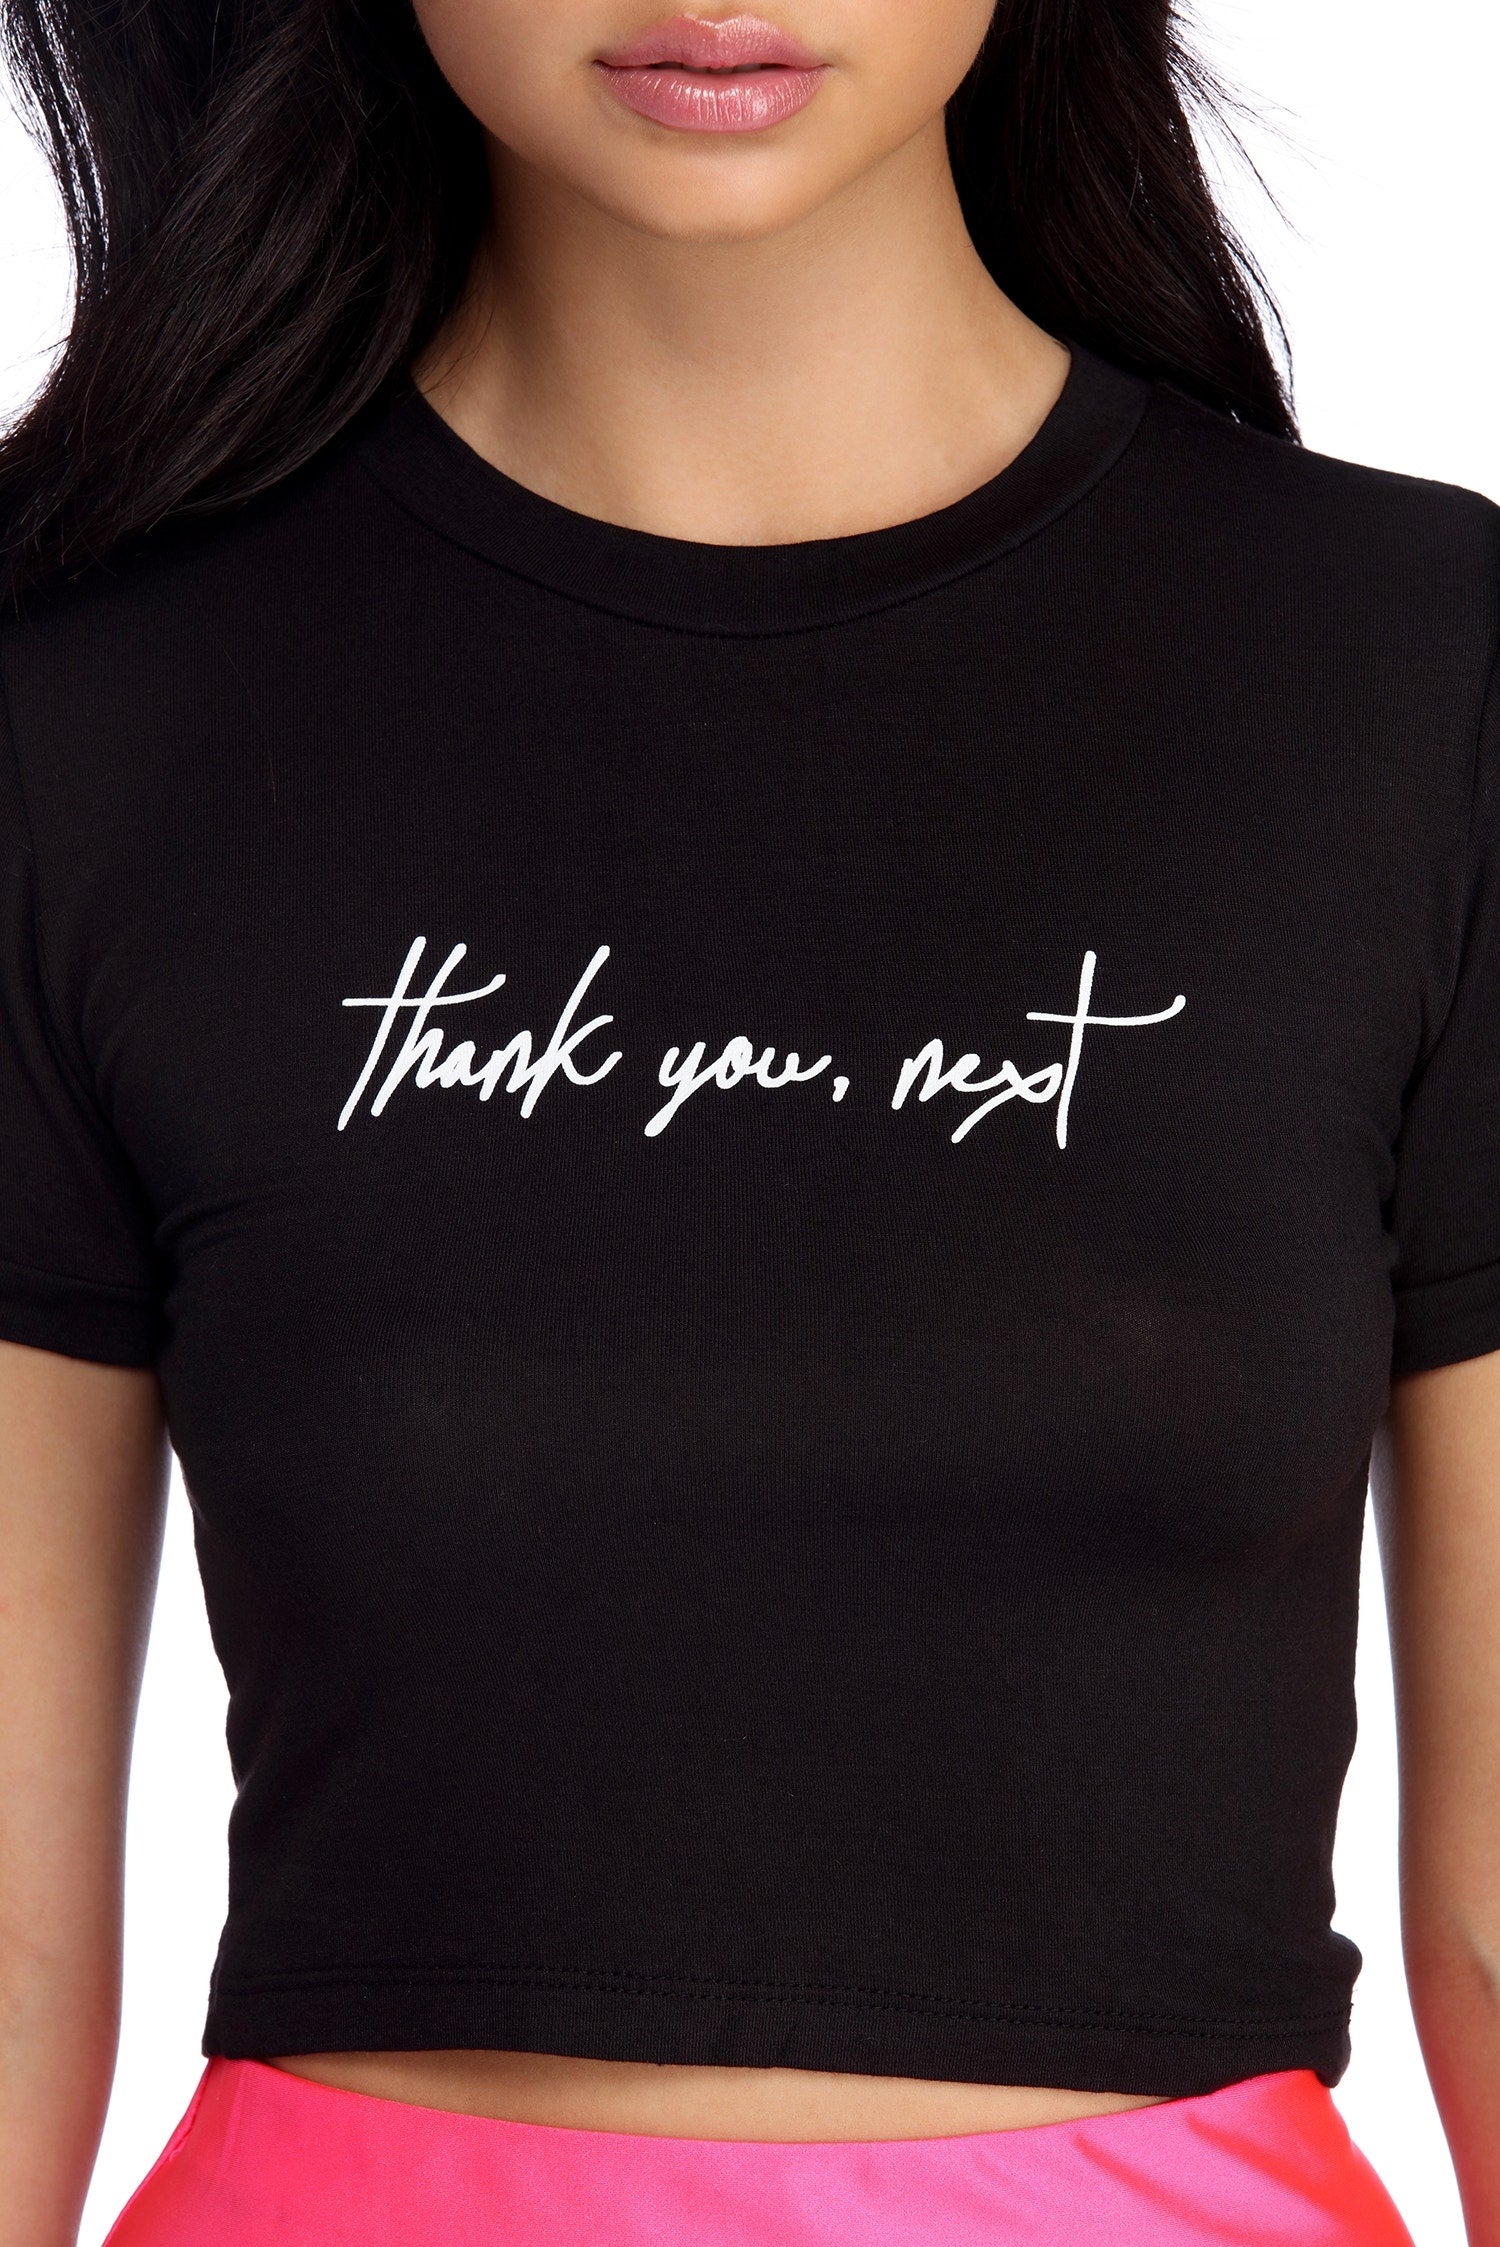 Thank You, Next Cropped Tee